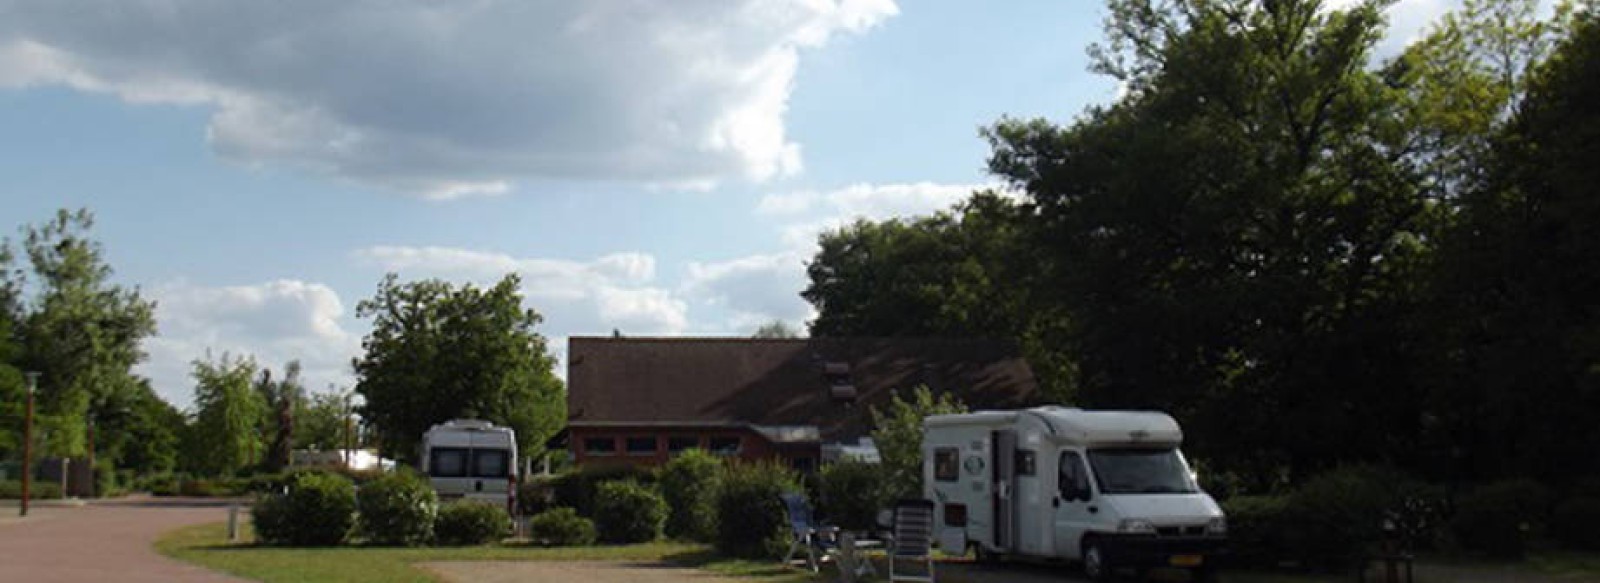 AIRE DE SERVICE CAMPING CAR - CAMPING ONLYCAMP LE PONT ROMAIN